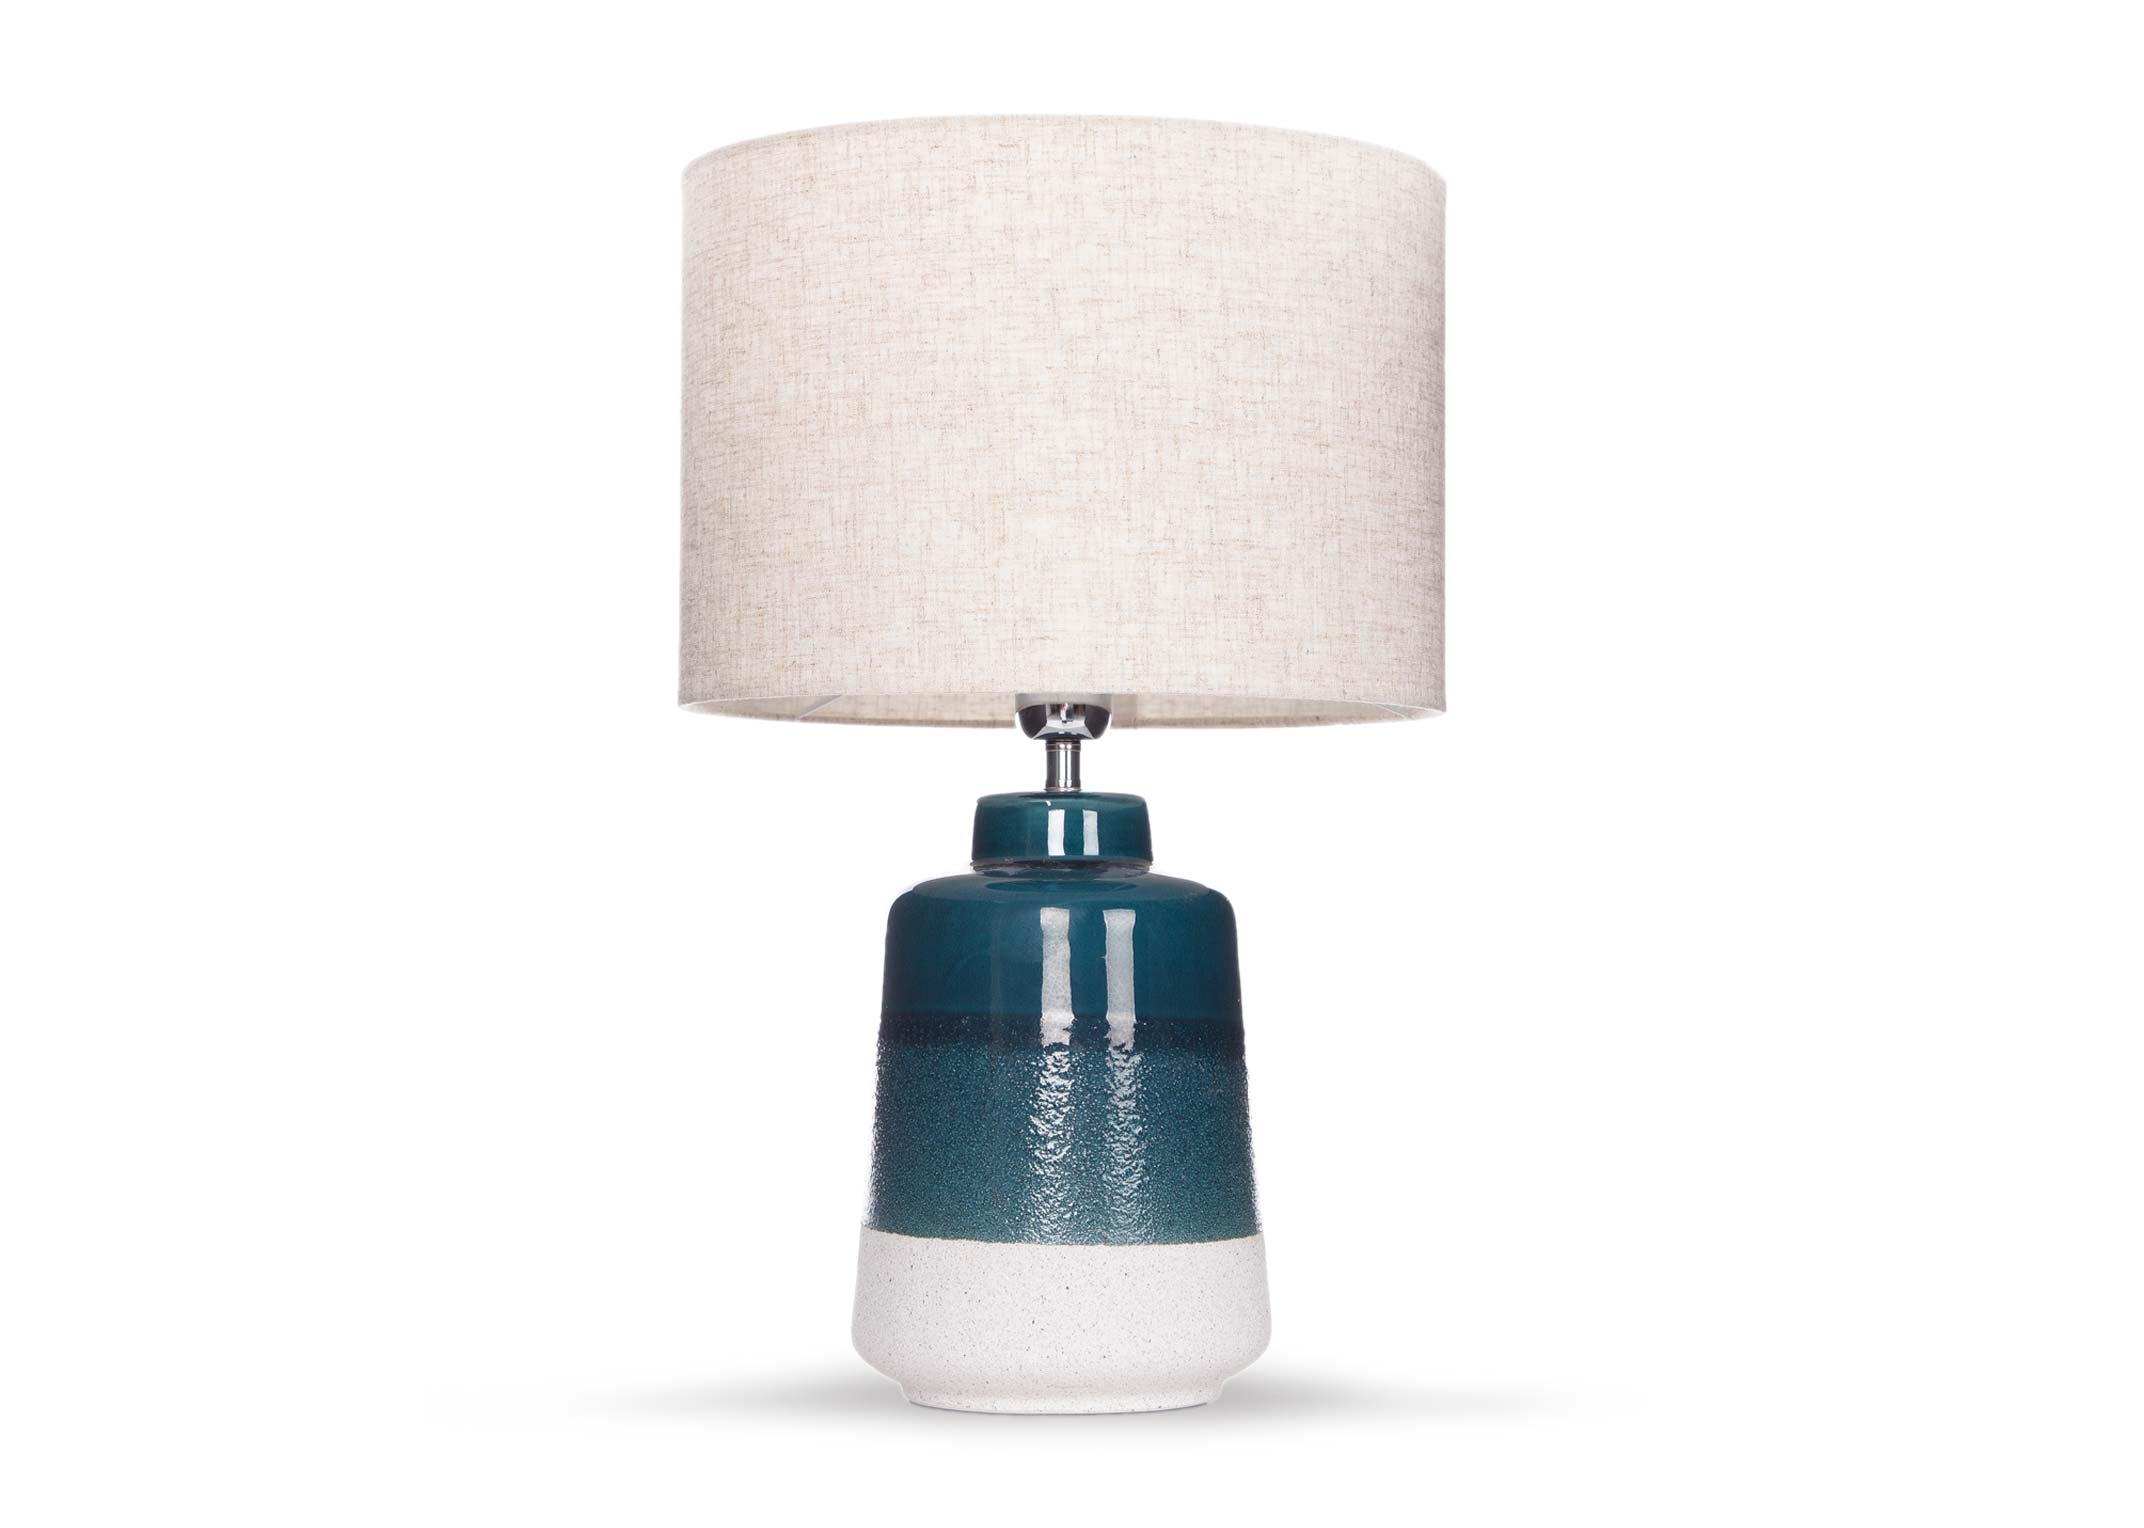 Teal Table Lamp With Cream Shade Wynn, Gold 24 Inch Emma Clear Glass Table Lamps For Bedroom